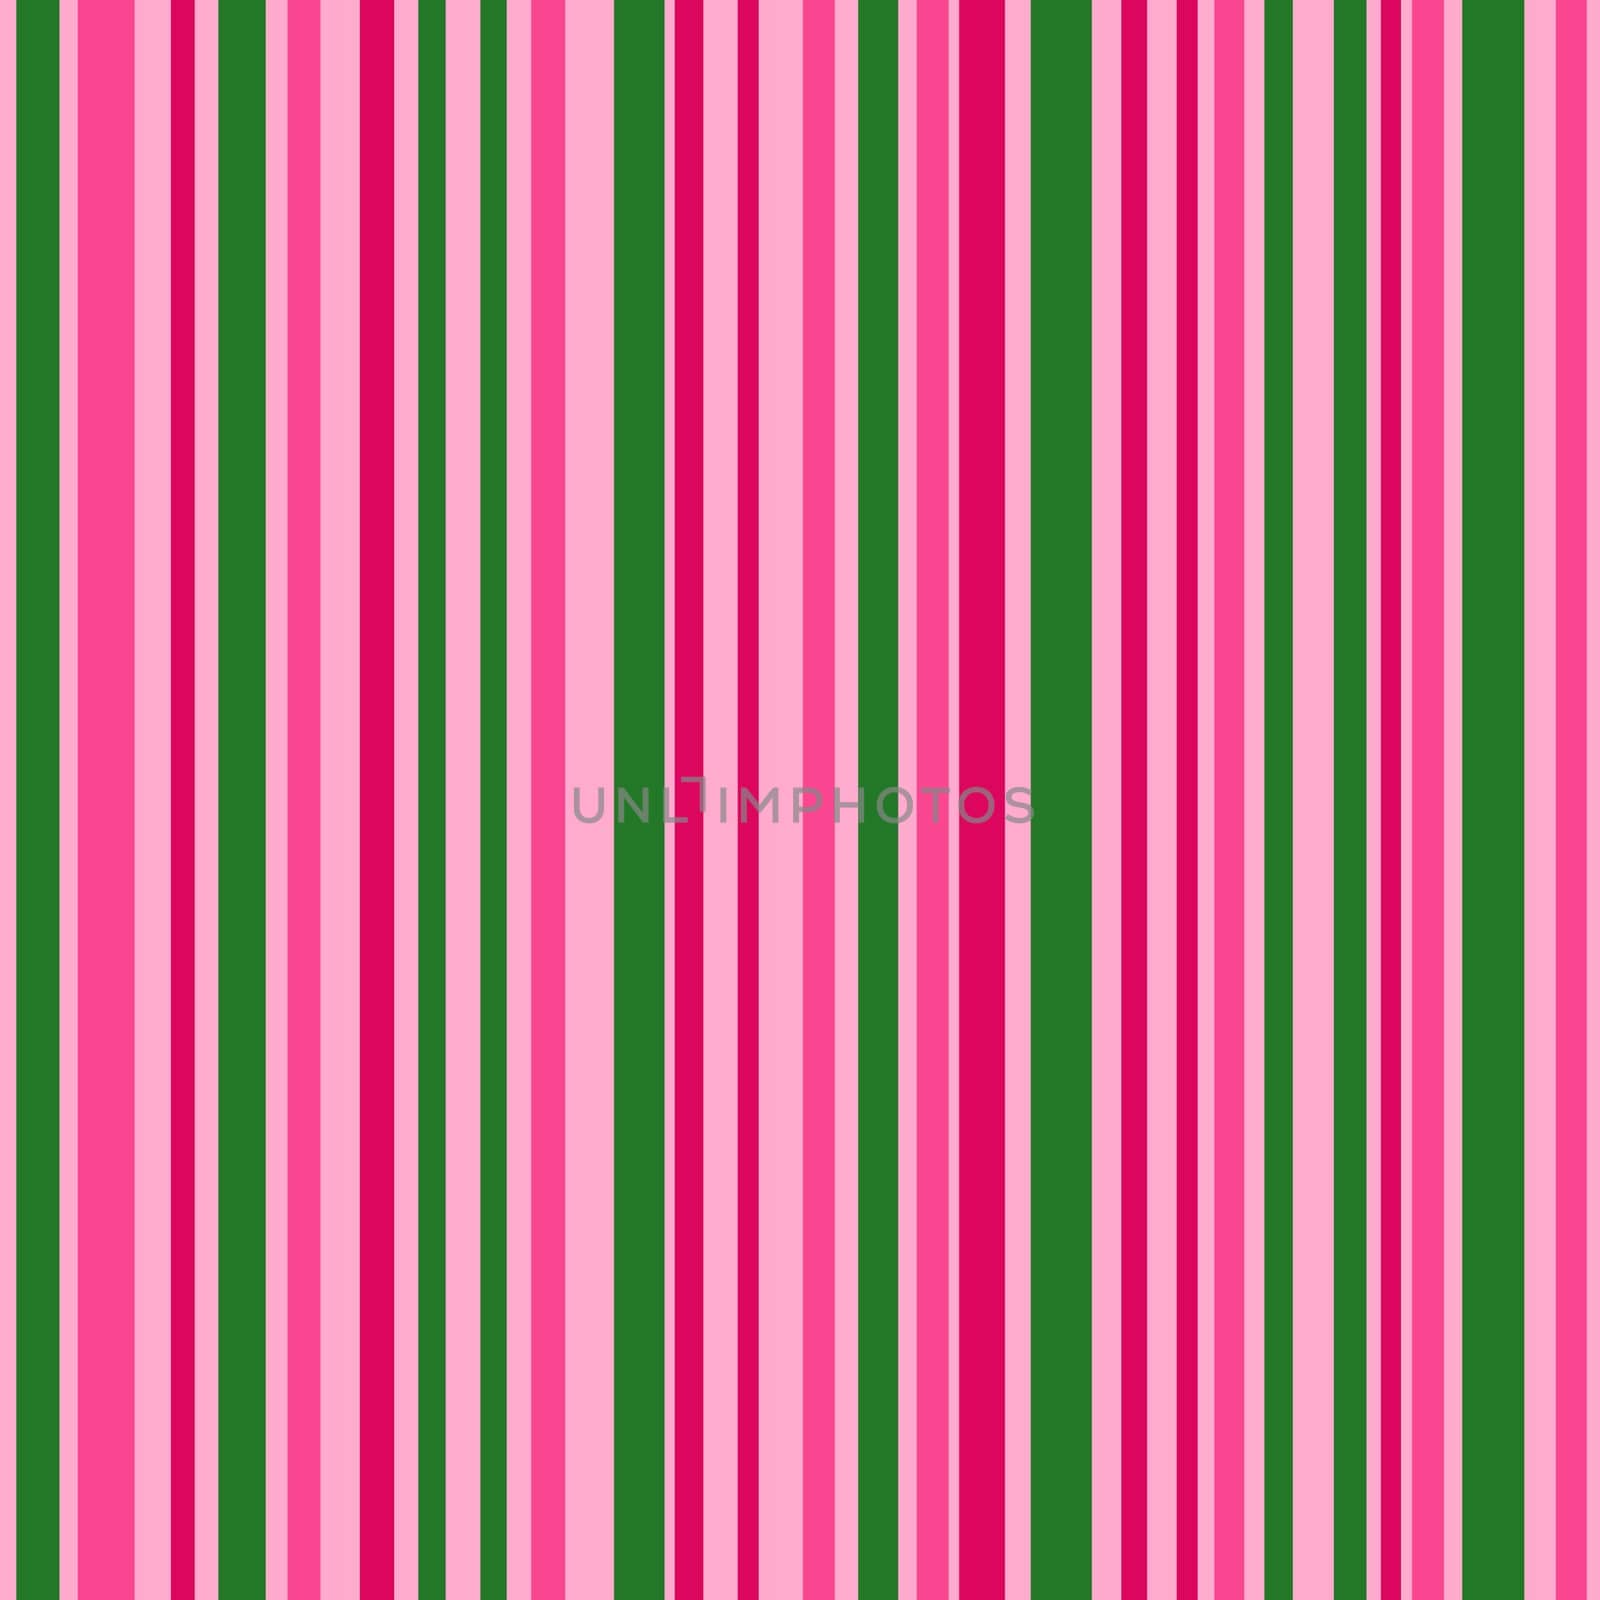 Hand drawn seamless pattern of vertical bright pink green stripes, summer vibrant striped background, modern trendy contemporary fabric print, saturated energetic colors, rainbow design dopamin. by Lagmar